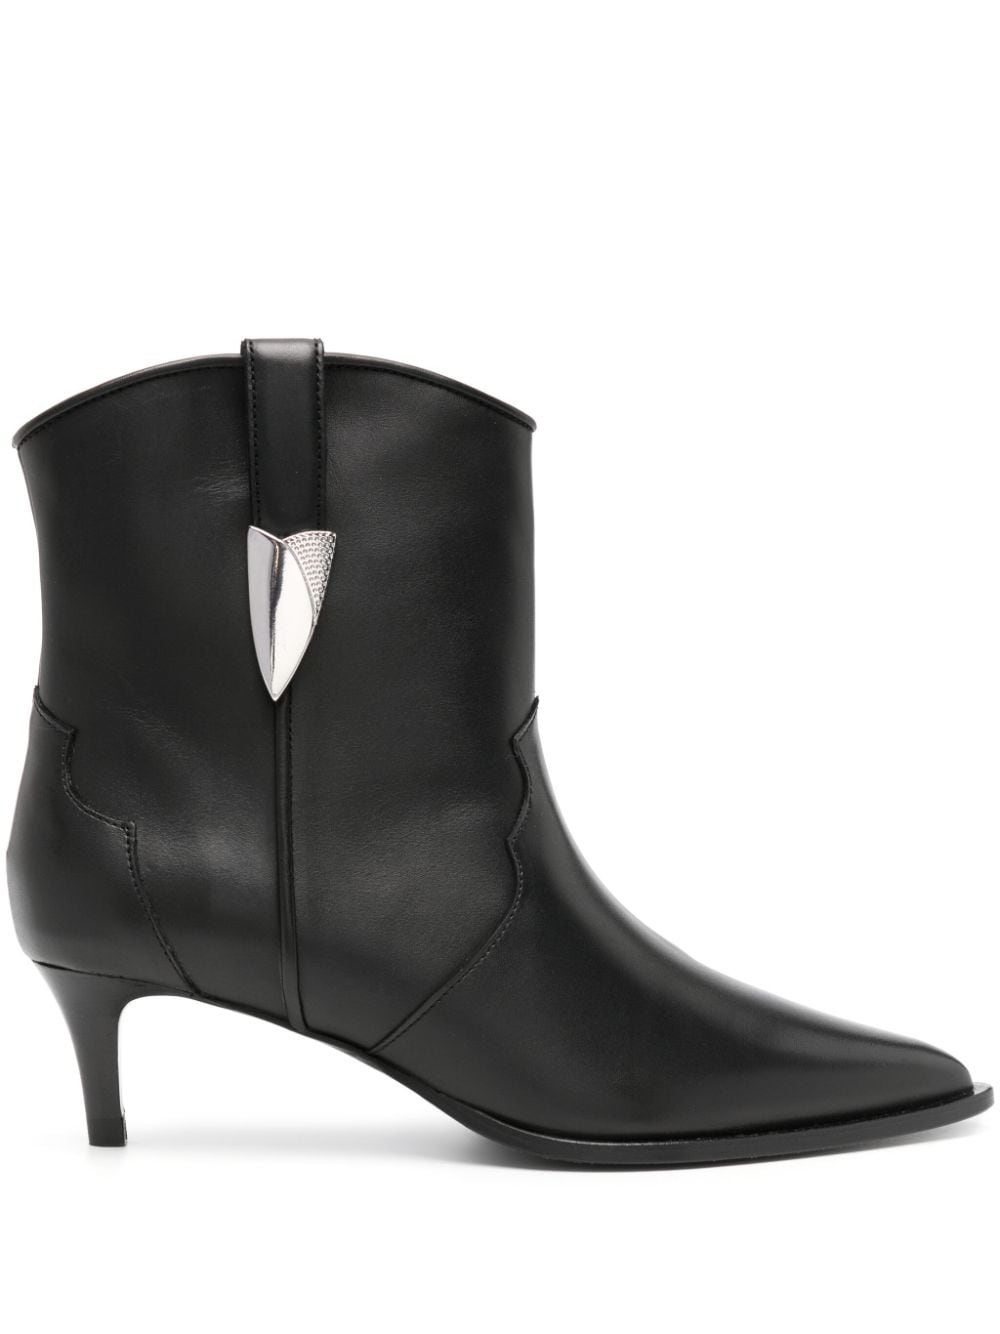 60mm leather ankle boots